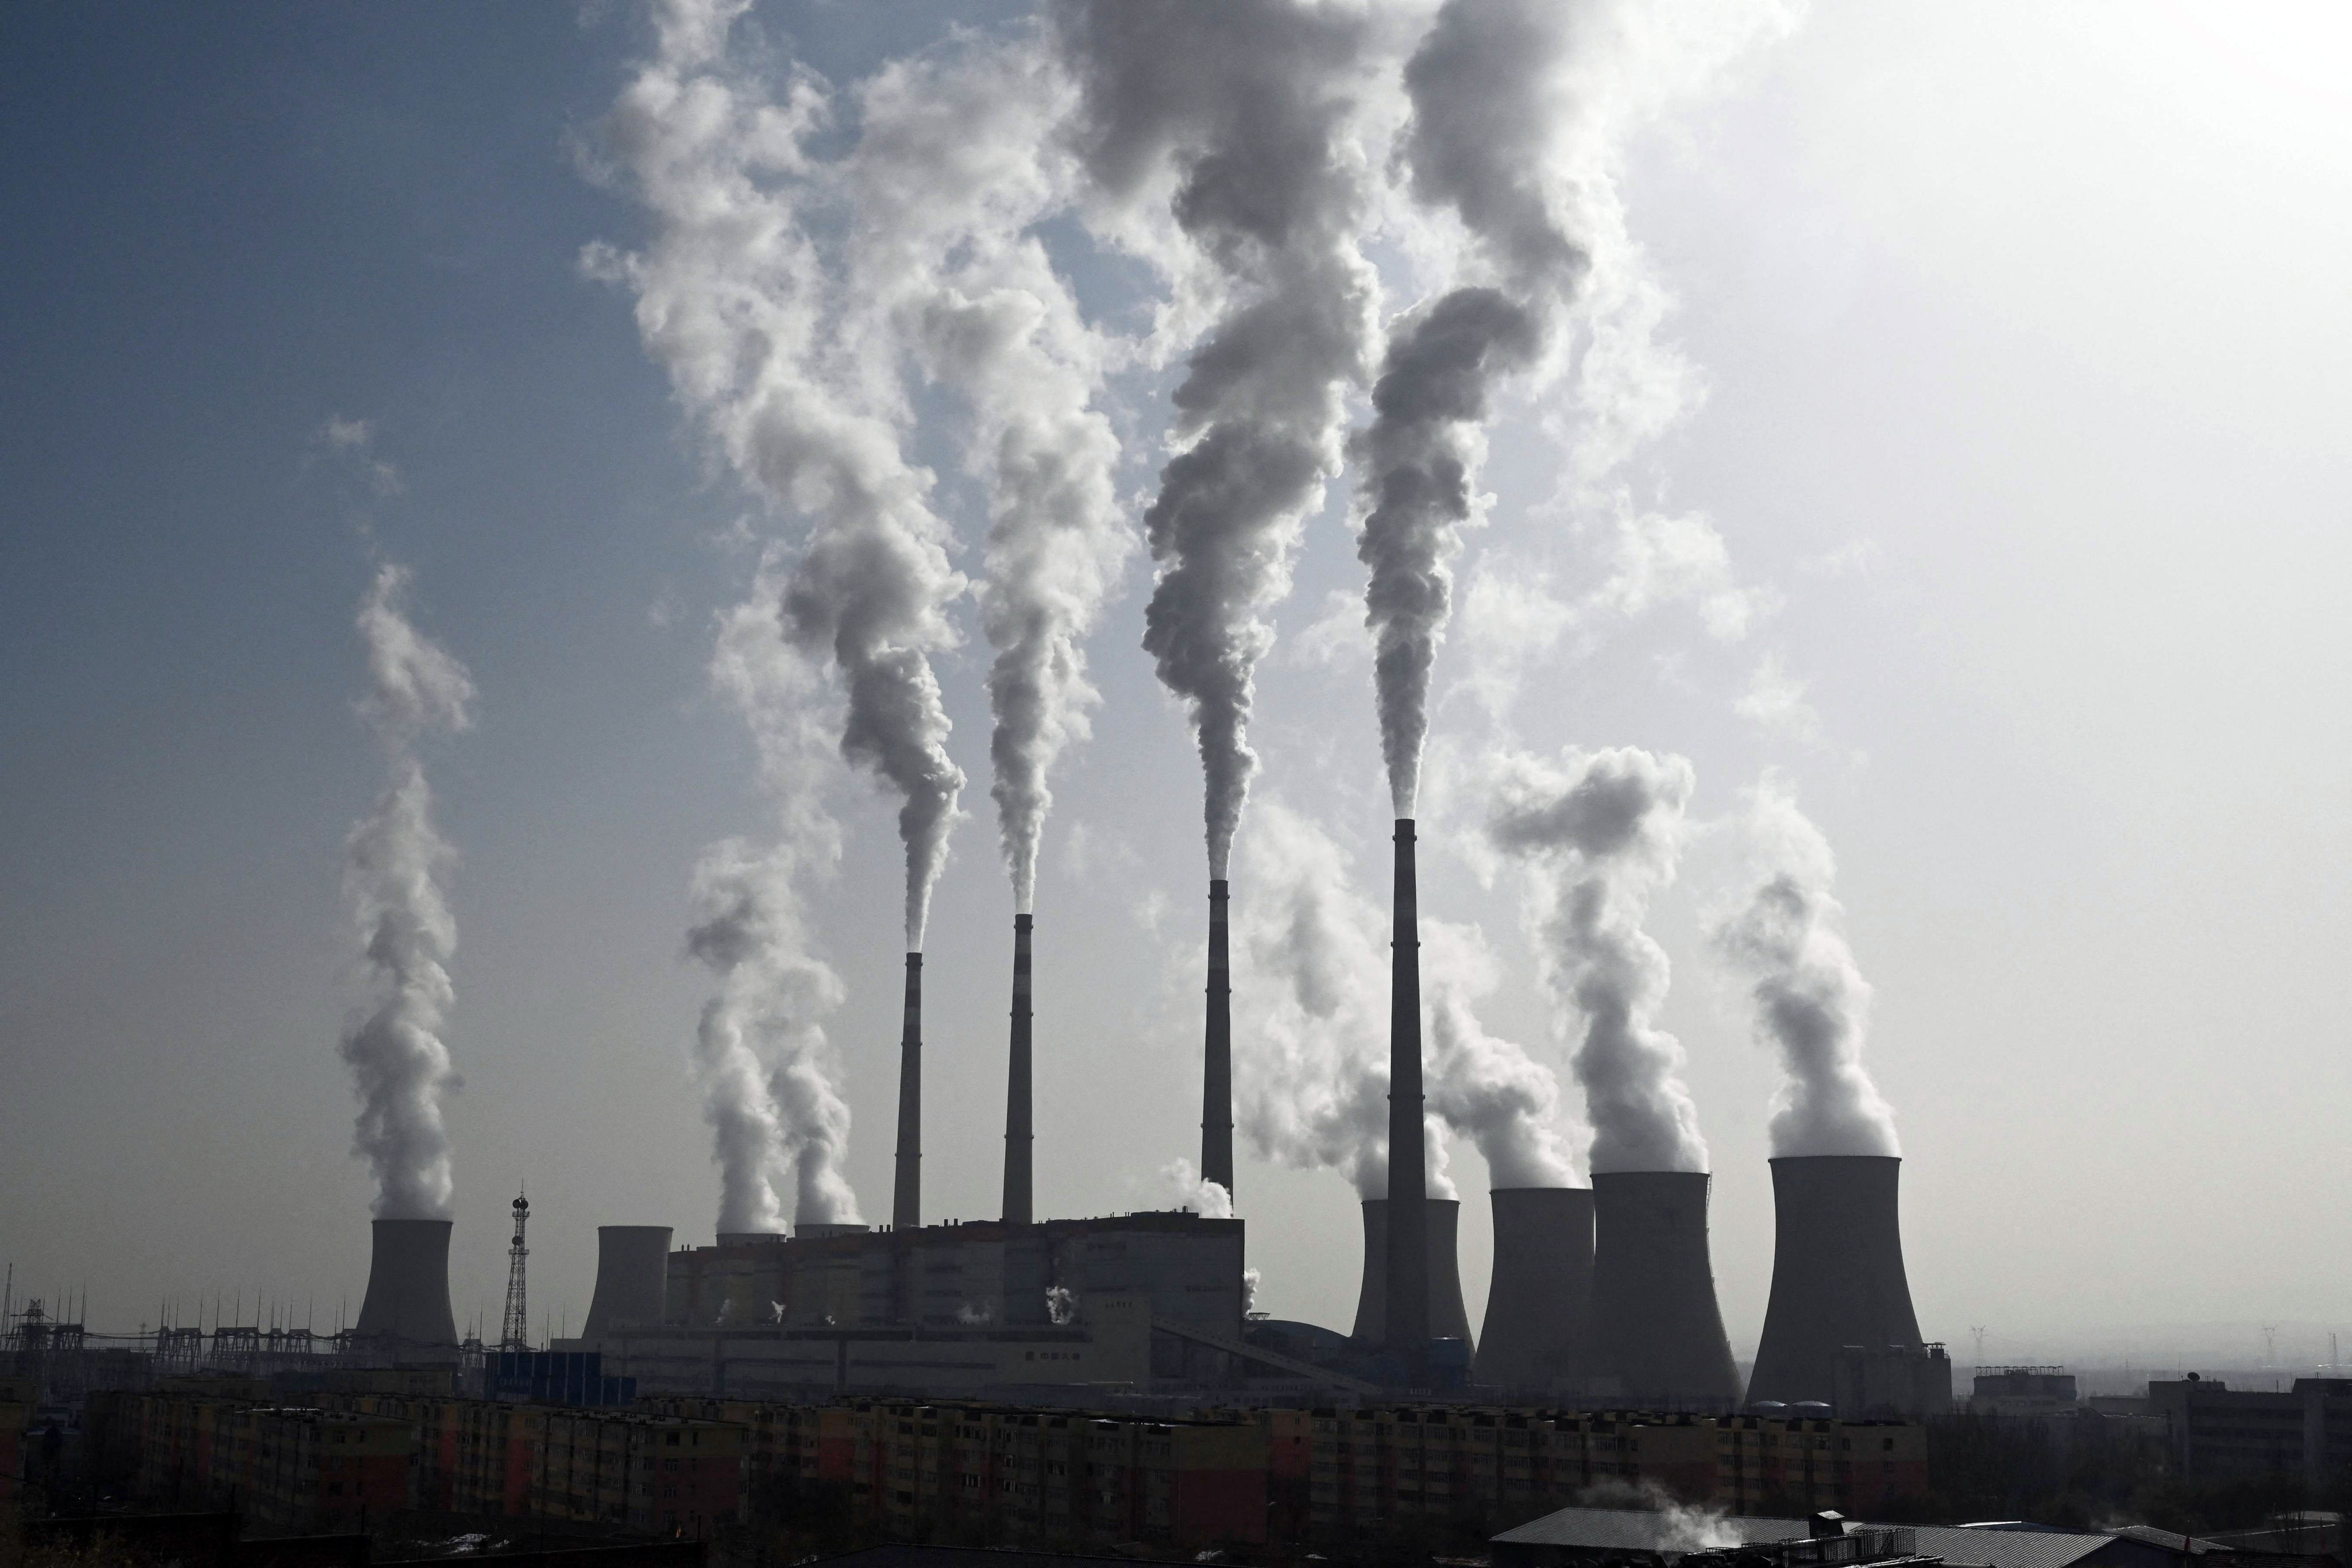 Specific aims include improving terminology, classification, information disclosure and benchmarks for monitoring and reporting carbon emissions. Photo: AFP